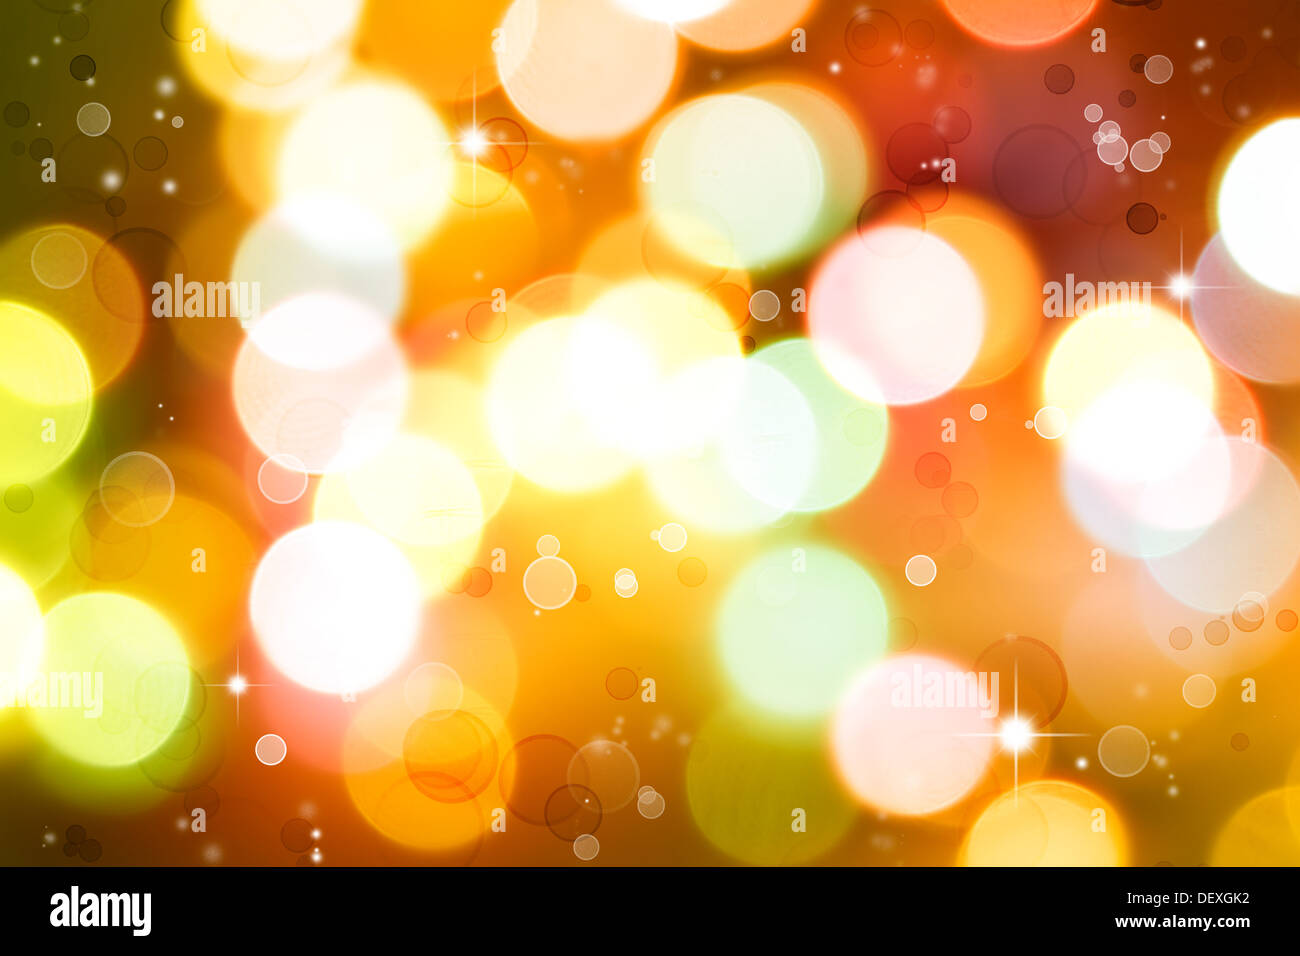 Bright circles of light abstract background Stock Photo